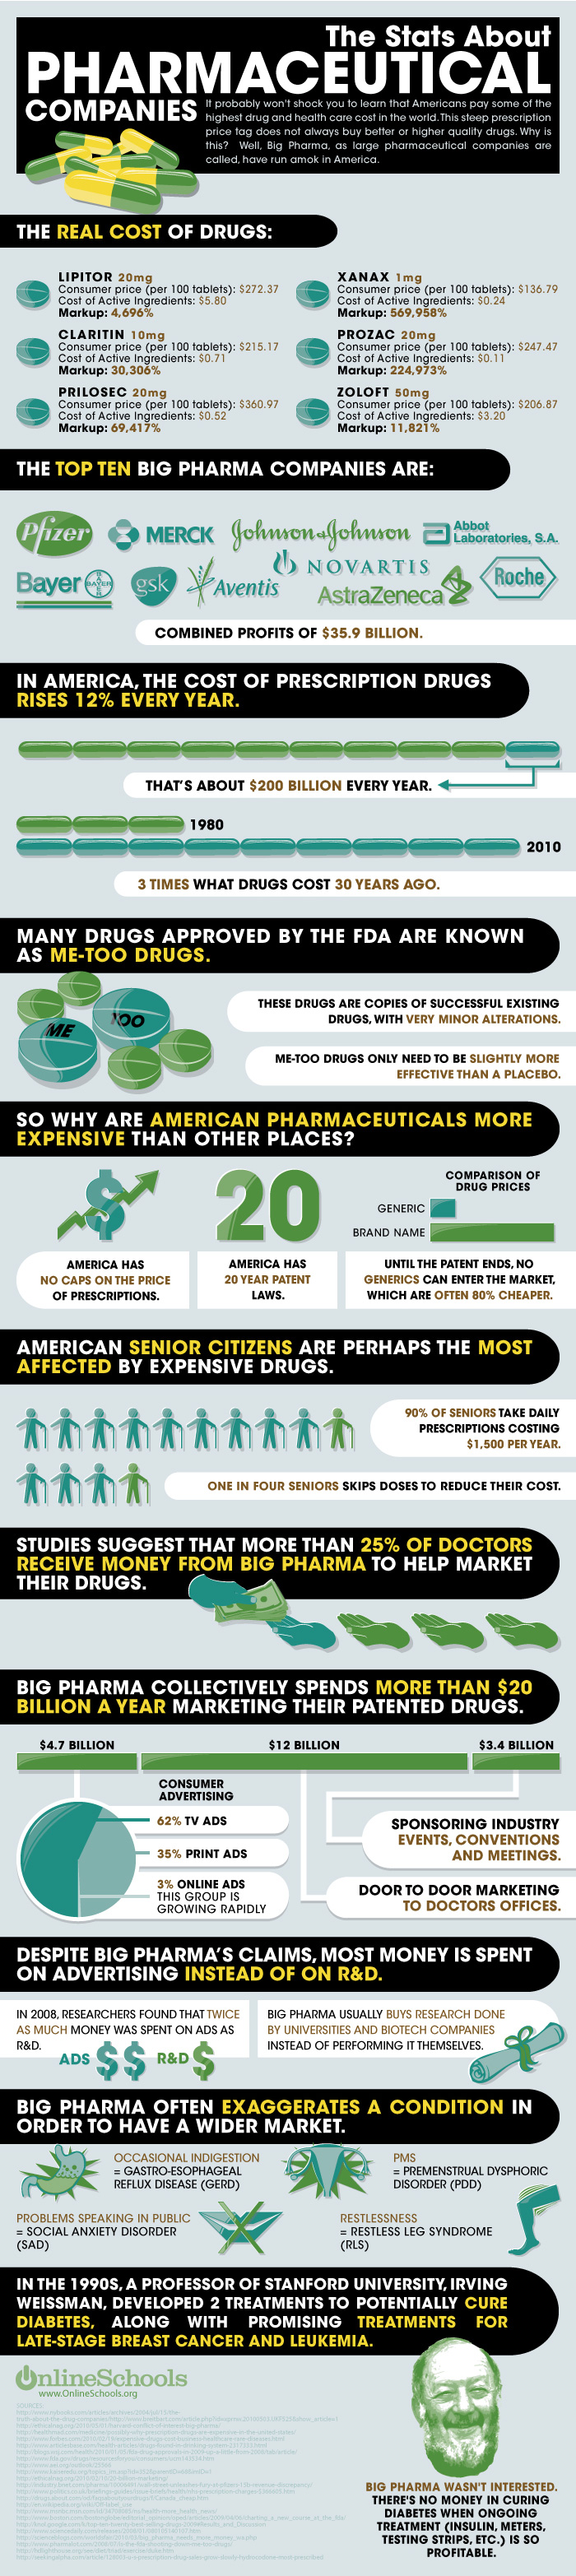 Source: http://www.myconfinedspace.com/2010/06/30/the-stats-about-pharmaceutical-companies/pharma-jpg/